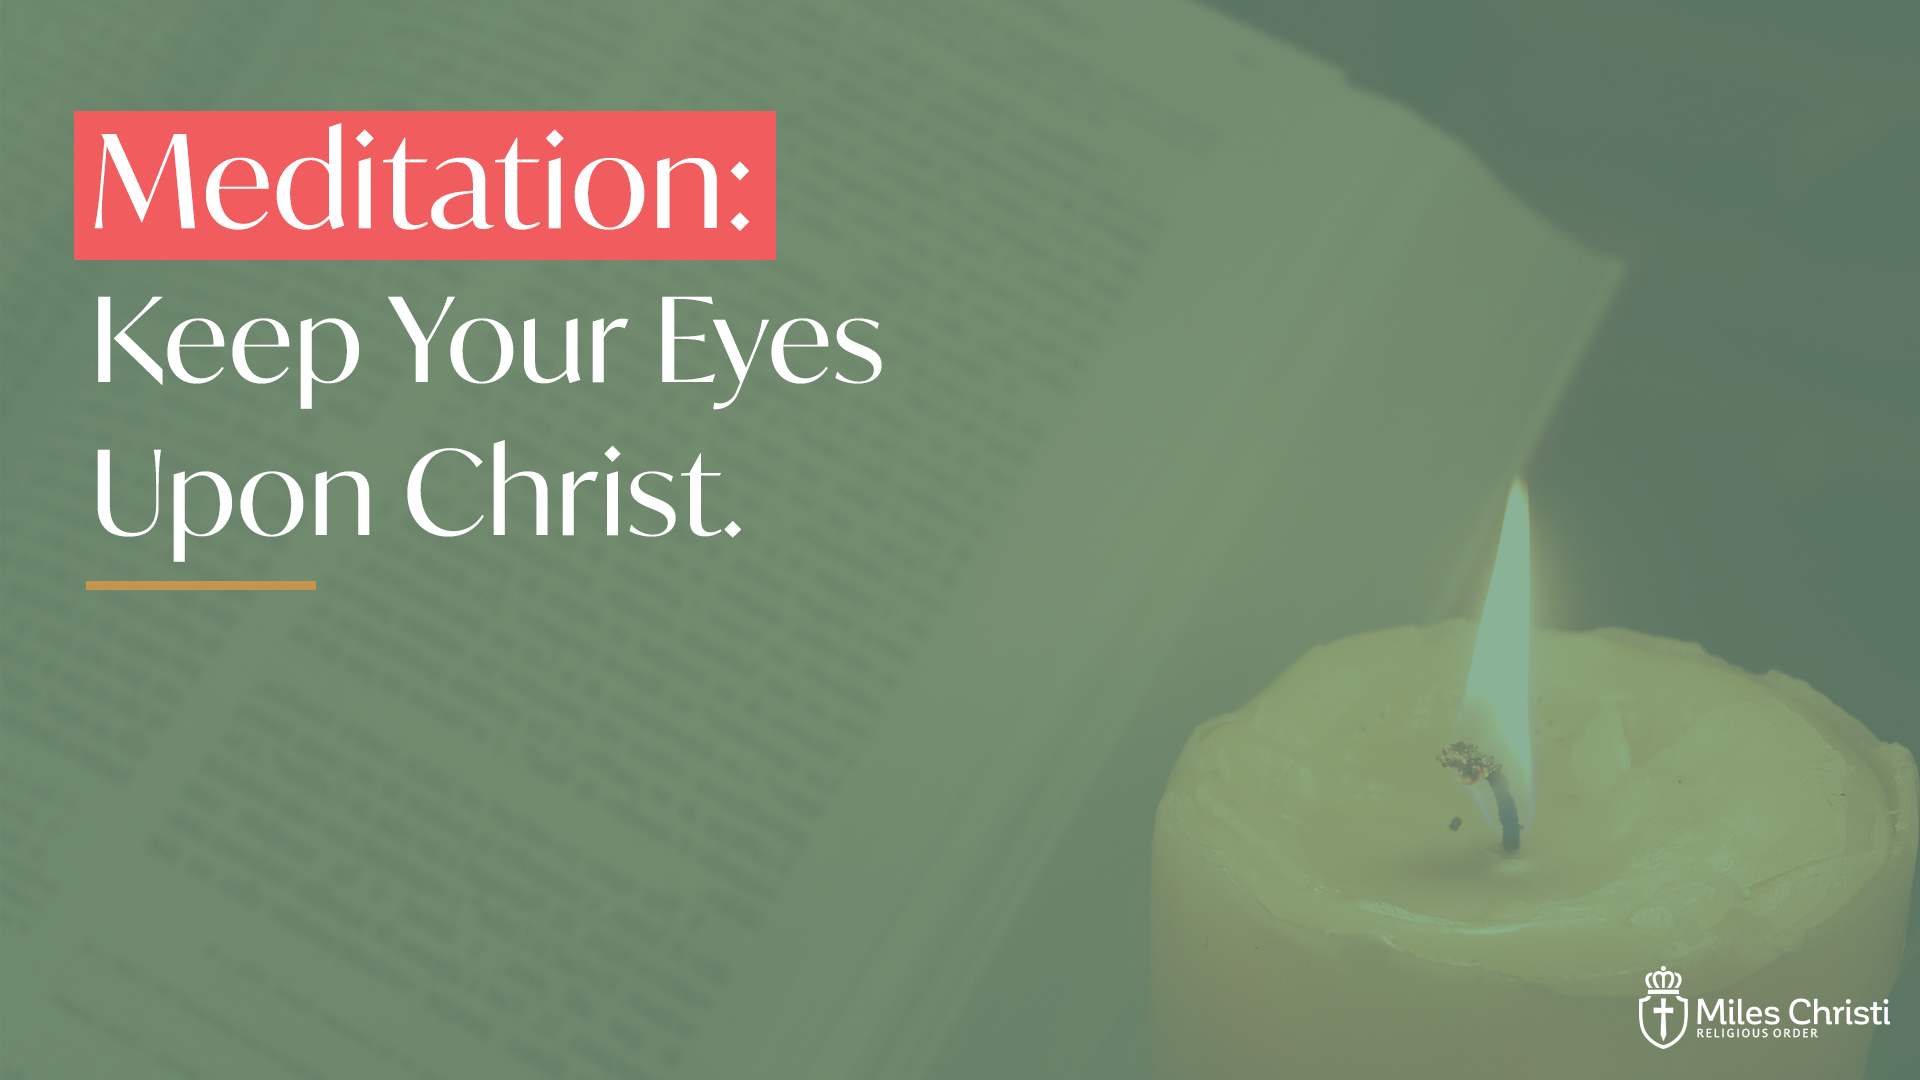 Keep Your Eyes on Upon Christ